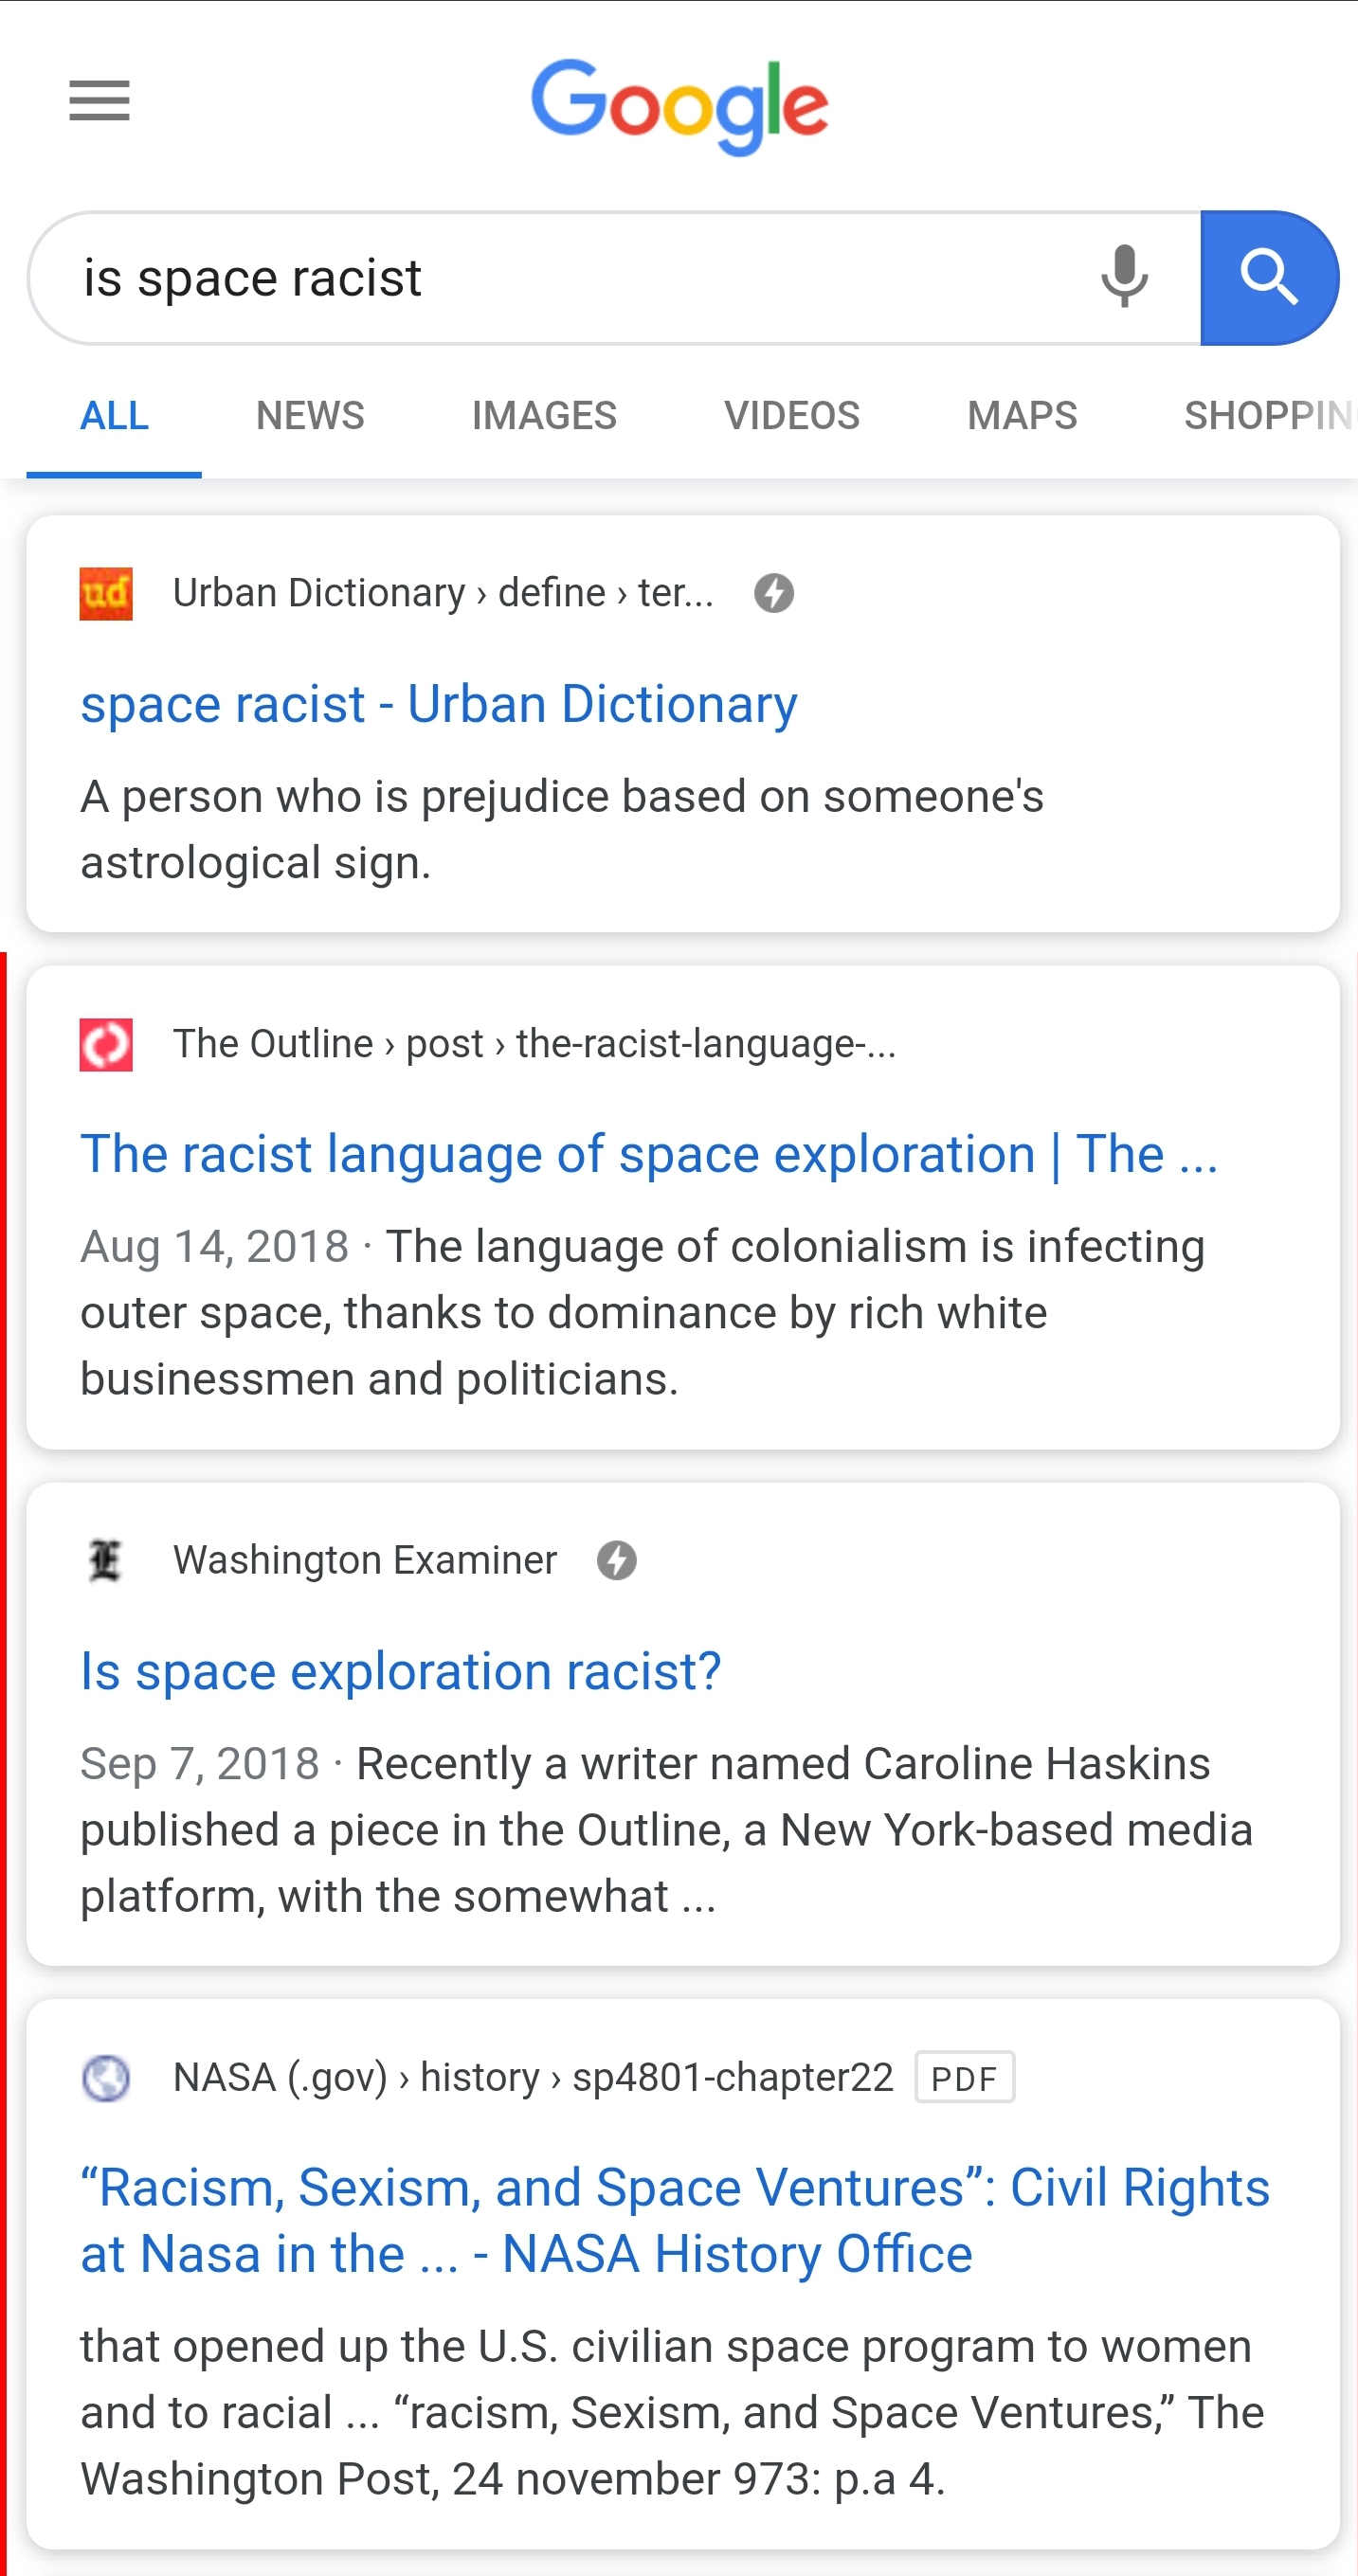 web page - Google is space racist a All News Images Videos Maps Shoppe ad Urban Dictionary define ter. O space racist Urban Dictionary A person who is prejudice based on someone's astrological sign The Outline post the racistlanguage.... The racist langua